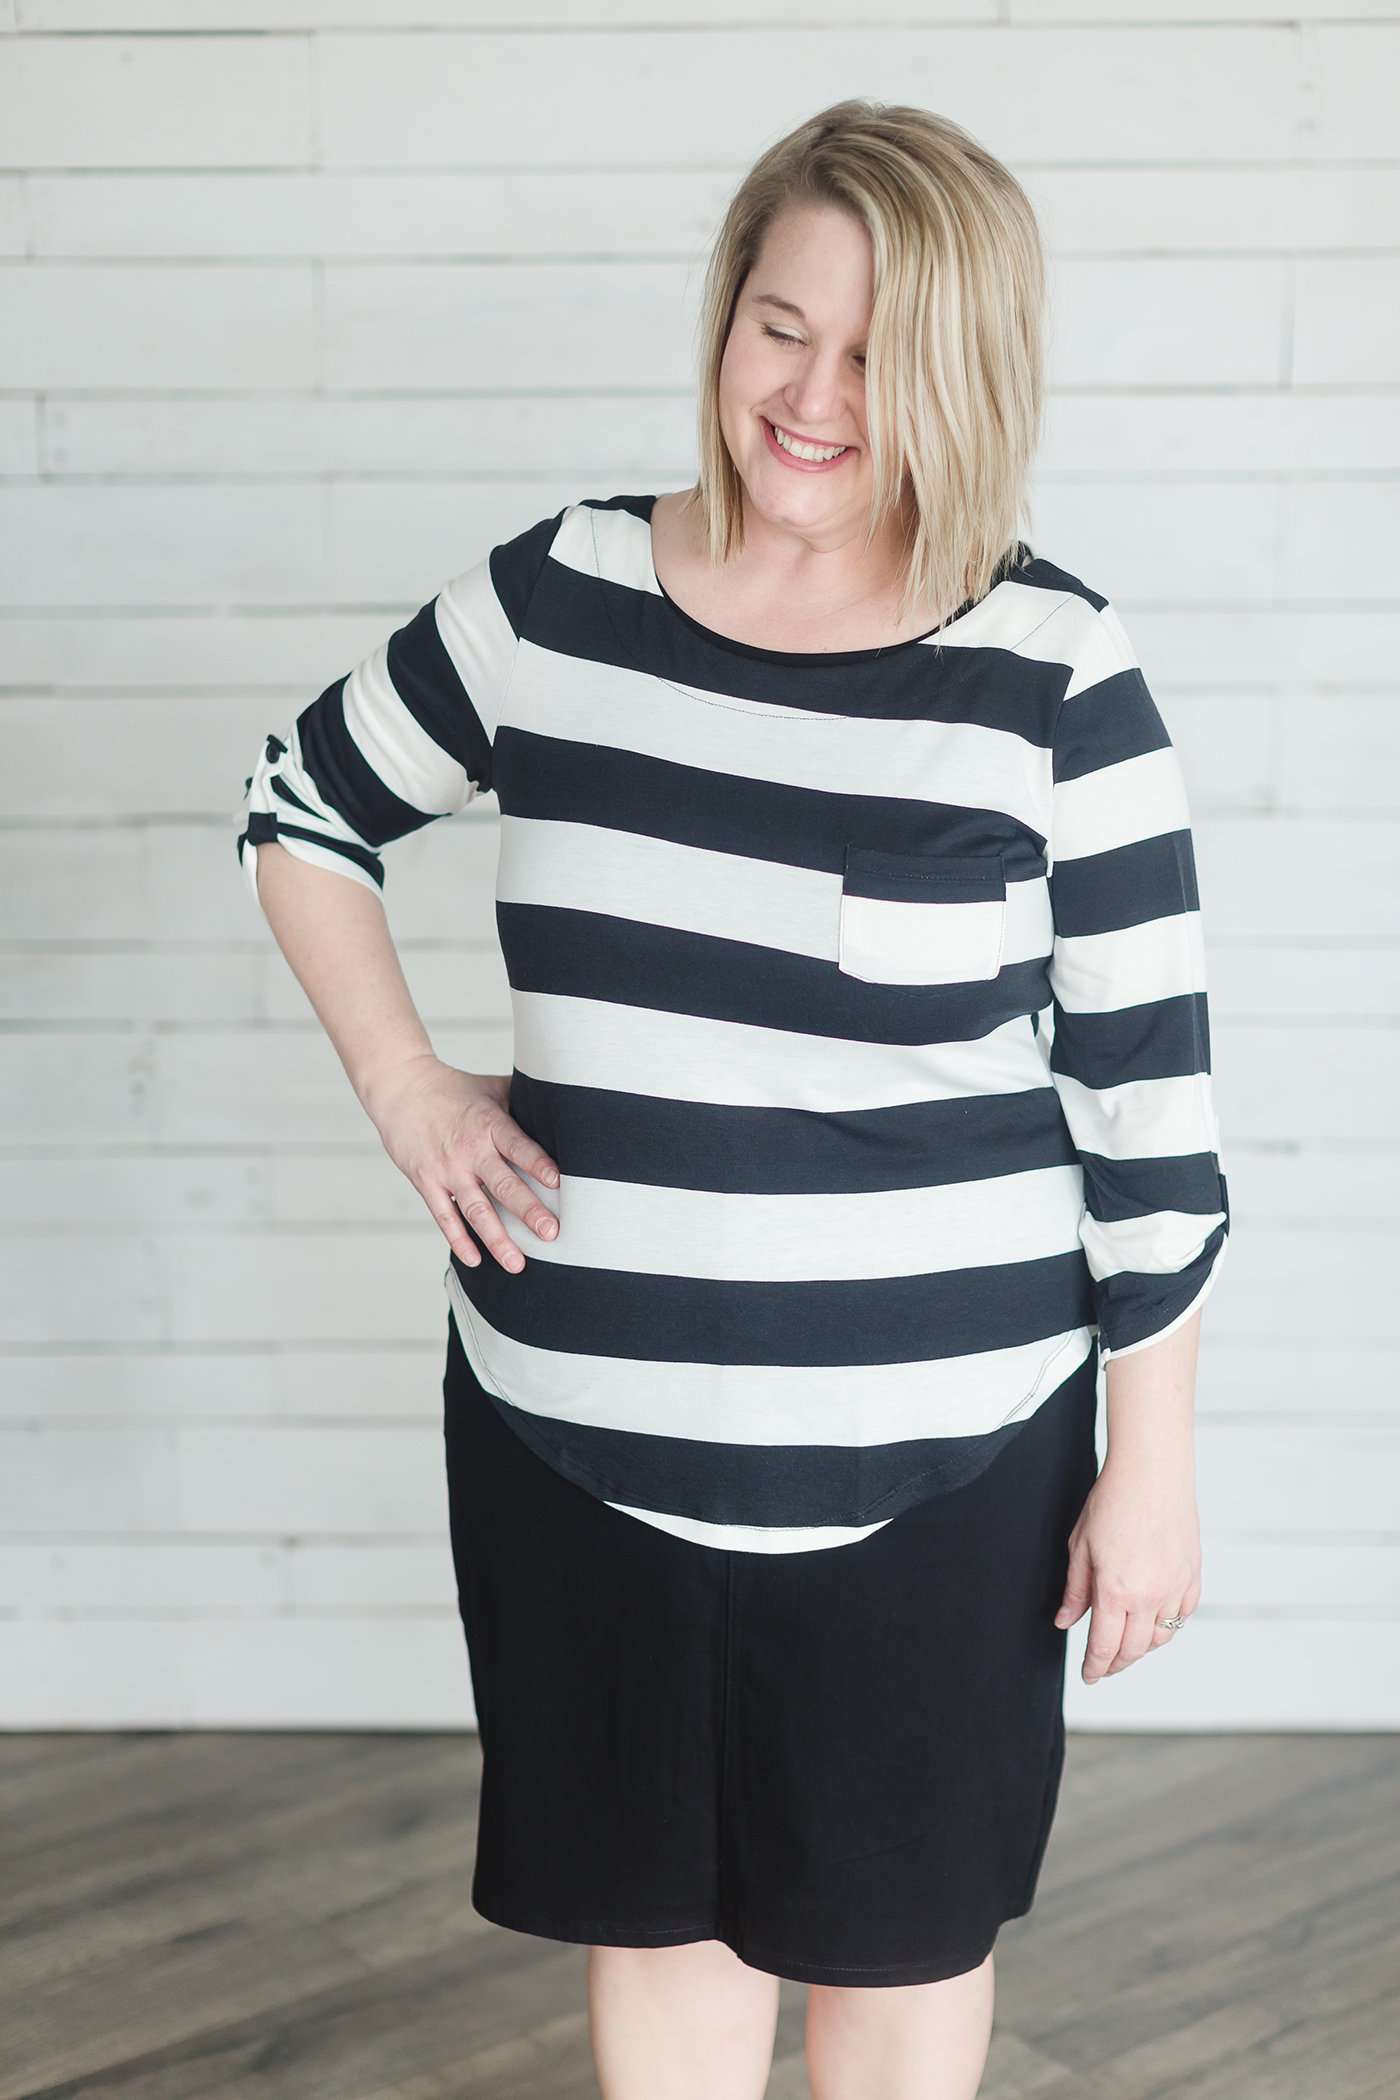 Modest black and white stripe, three quarter length sleeve with front pocket.